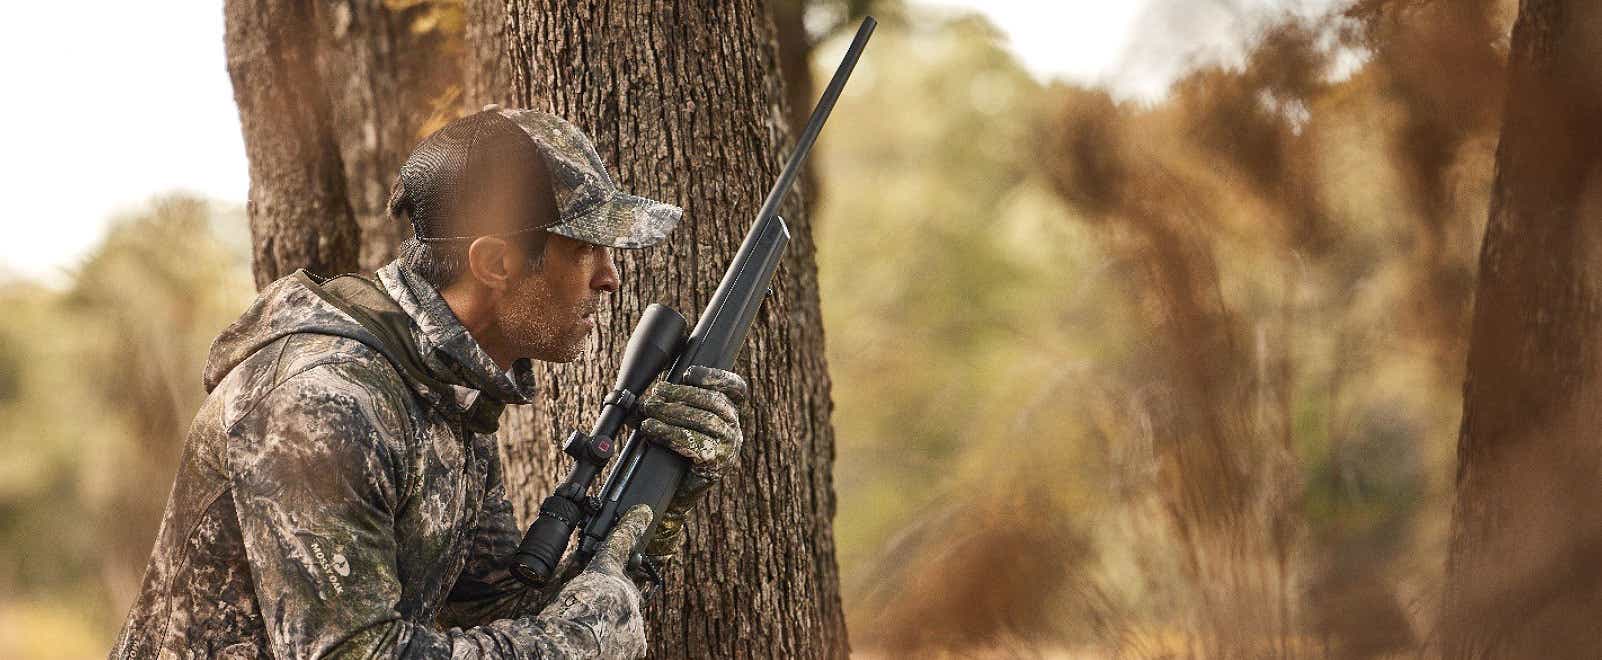 A hunter in the woods with his rifle